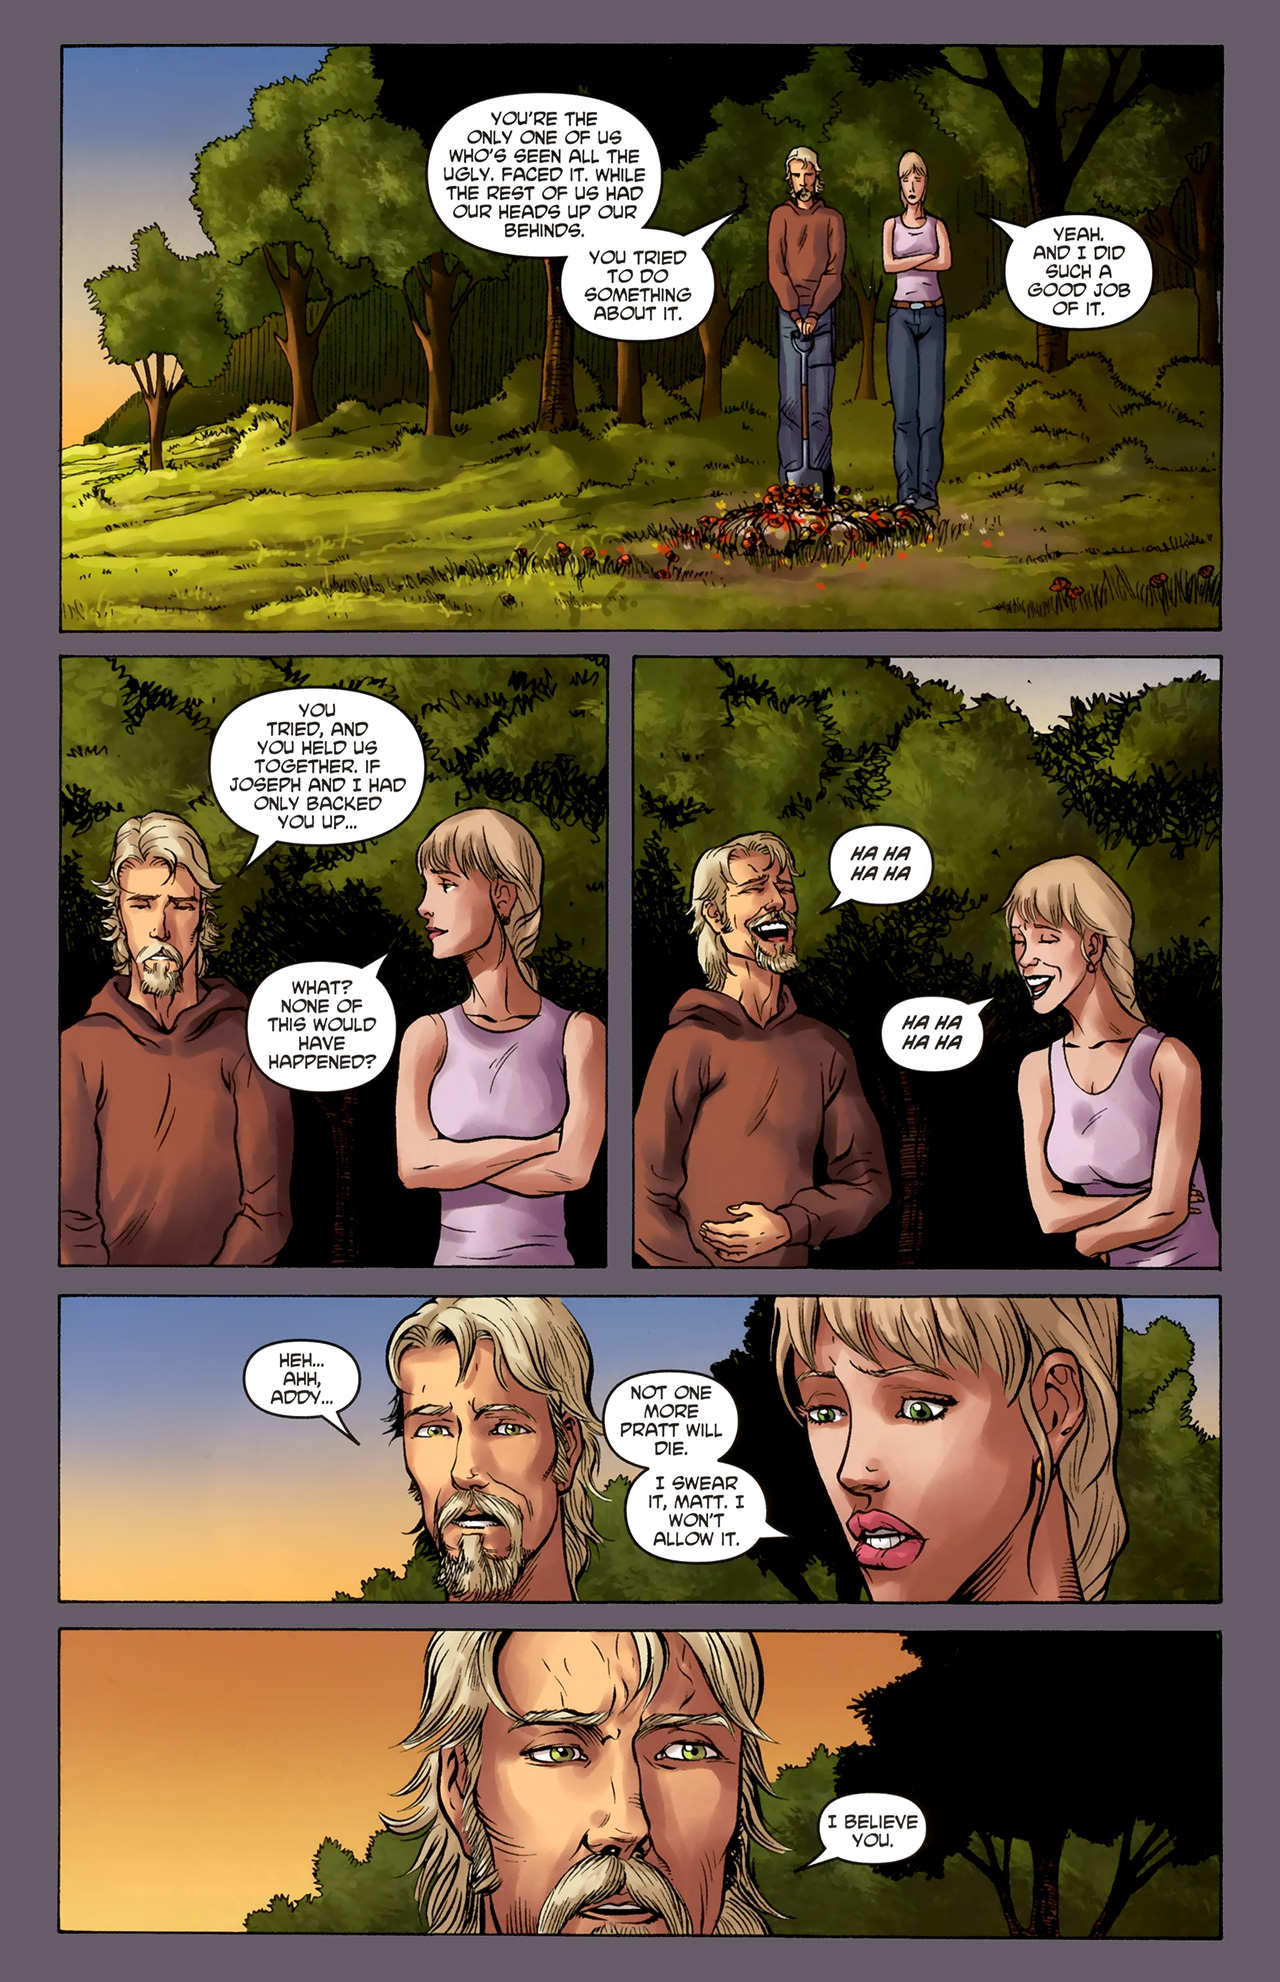 Crossed Family Values - Issue 6 of 7